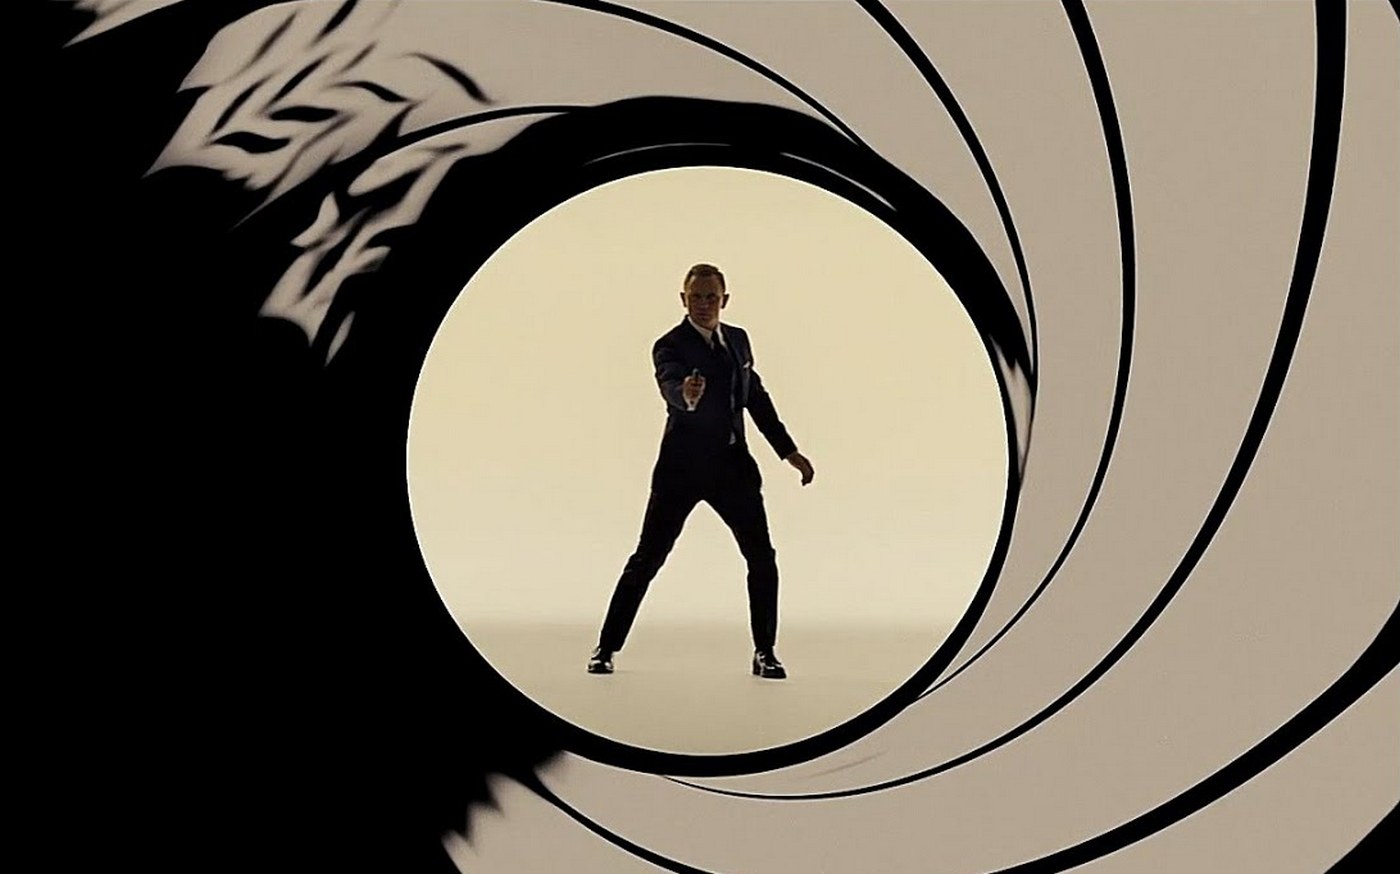 James Bond Movies Streaming Guide Where To Watch 007 Online - Den Of Geek